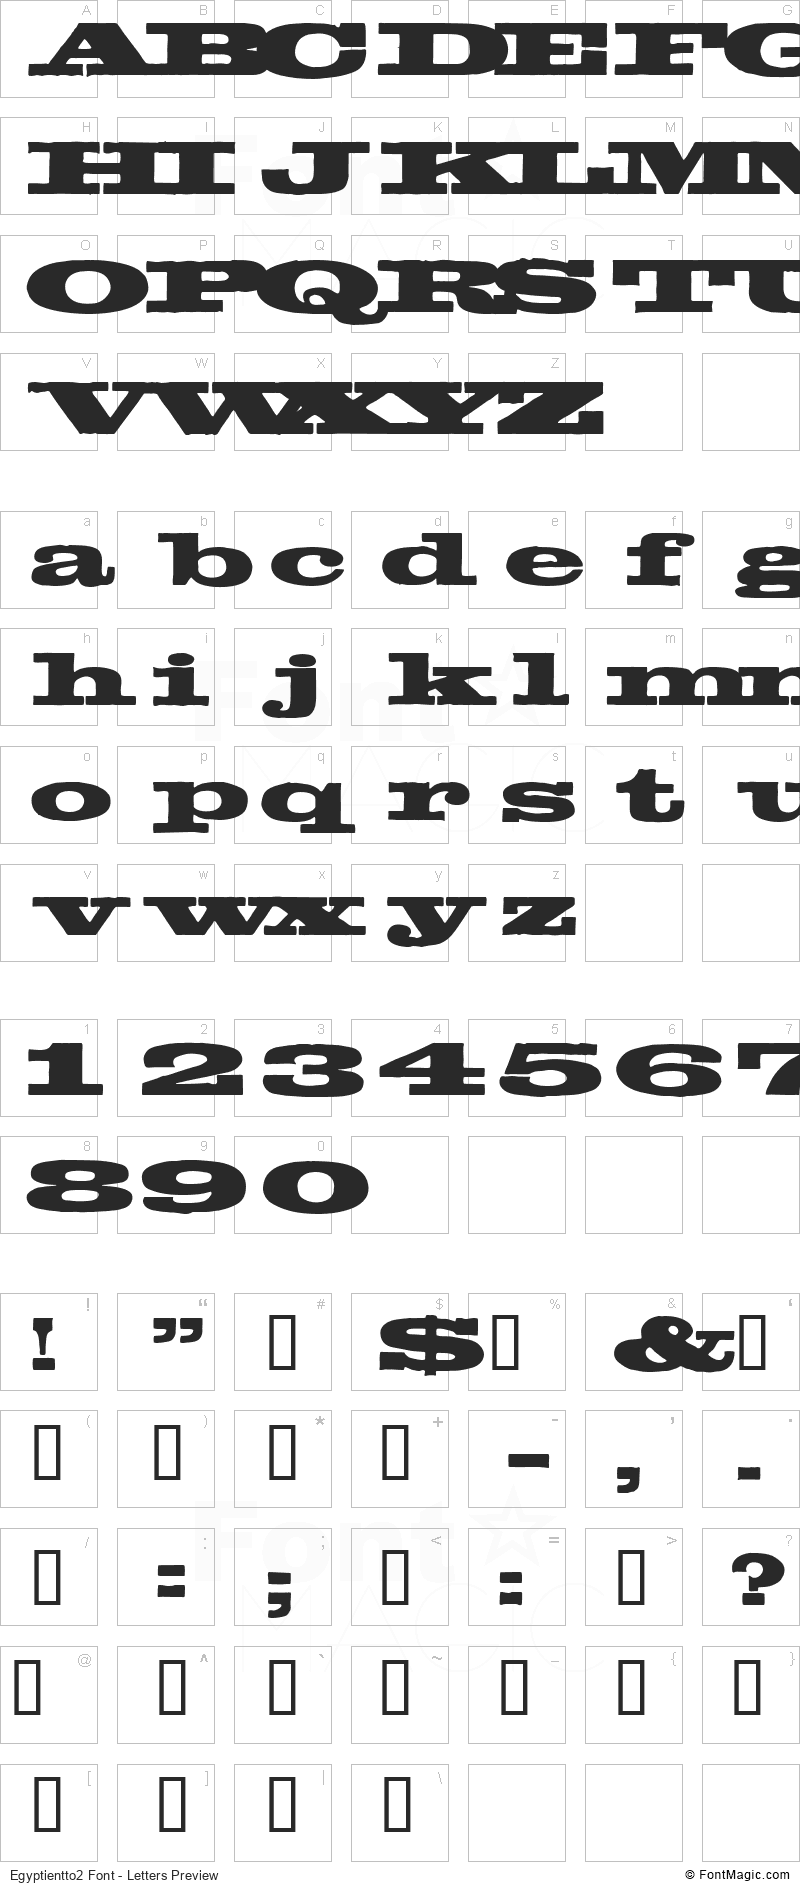 Egyptientto2 Font - All Latters Preview Chart